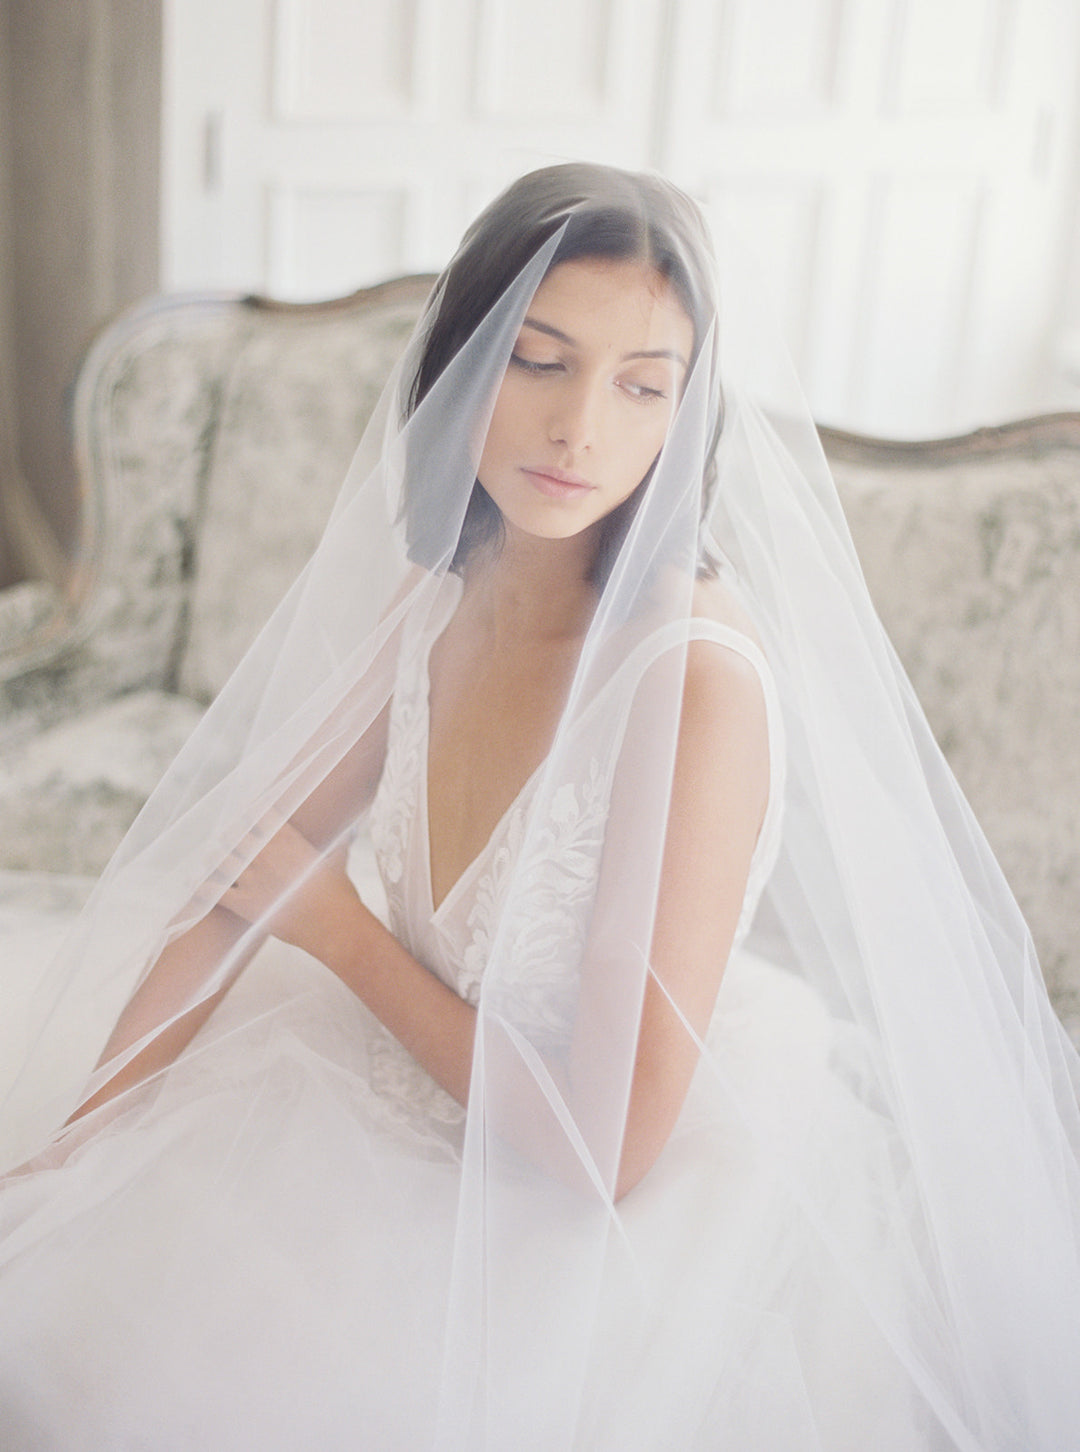 Bridal veil with blusher.